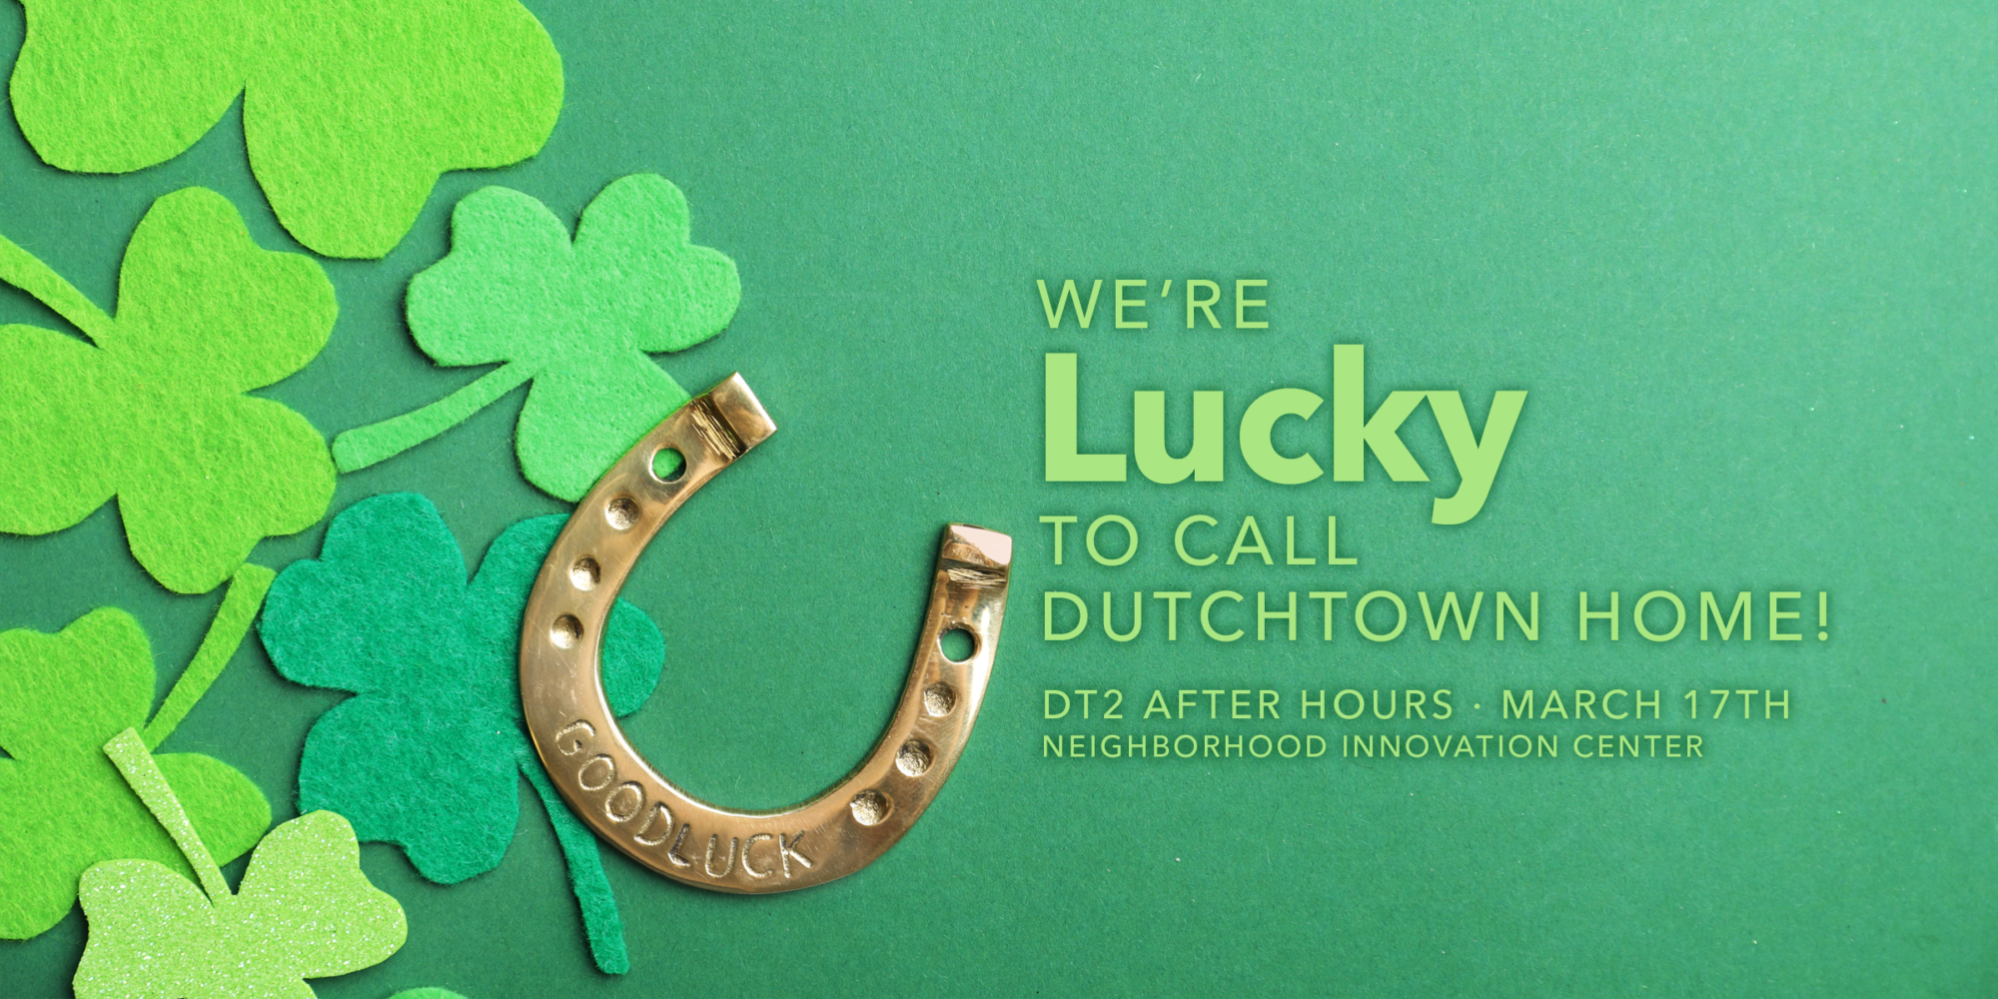 We're lucky to call Dutchtown home! DT2 After Hours: March 17th at the Neighborhood Innovation Center.